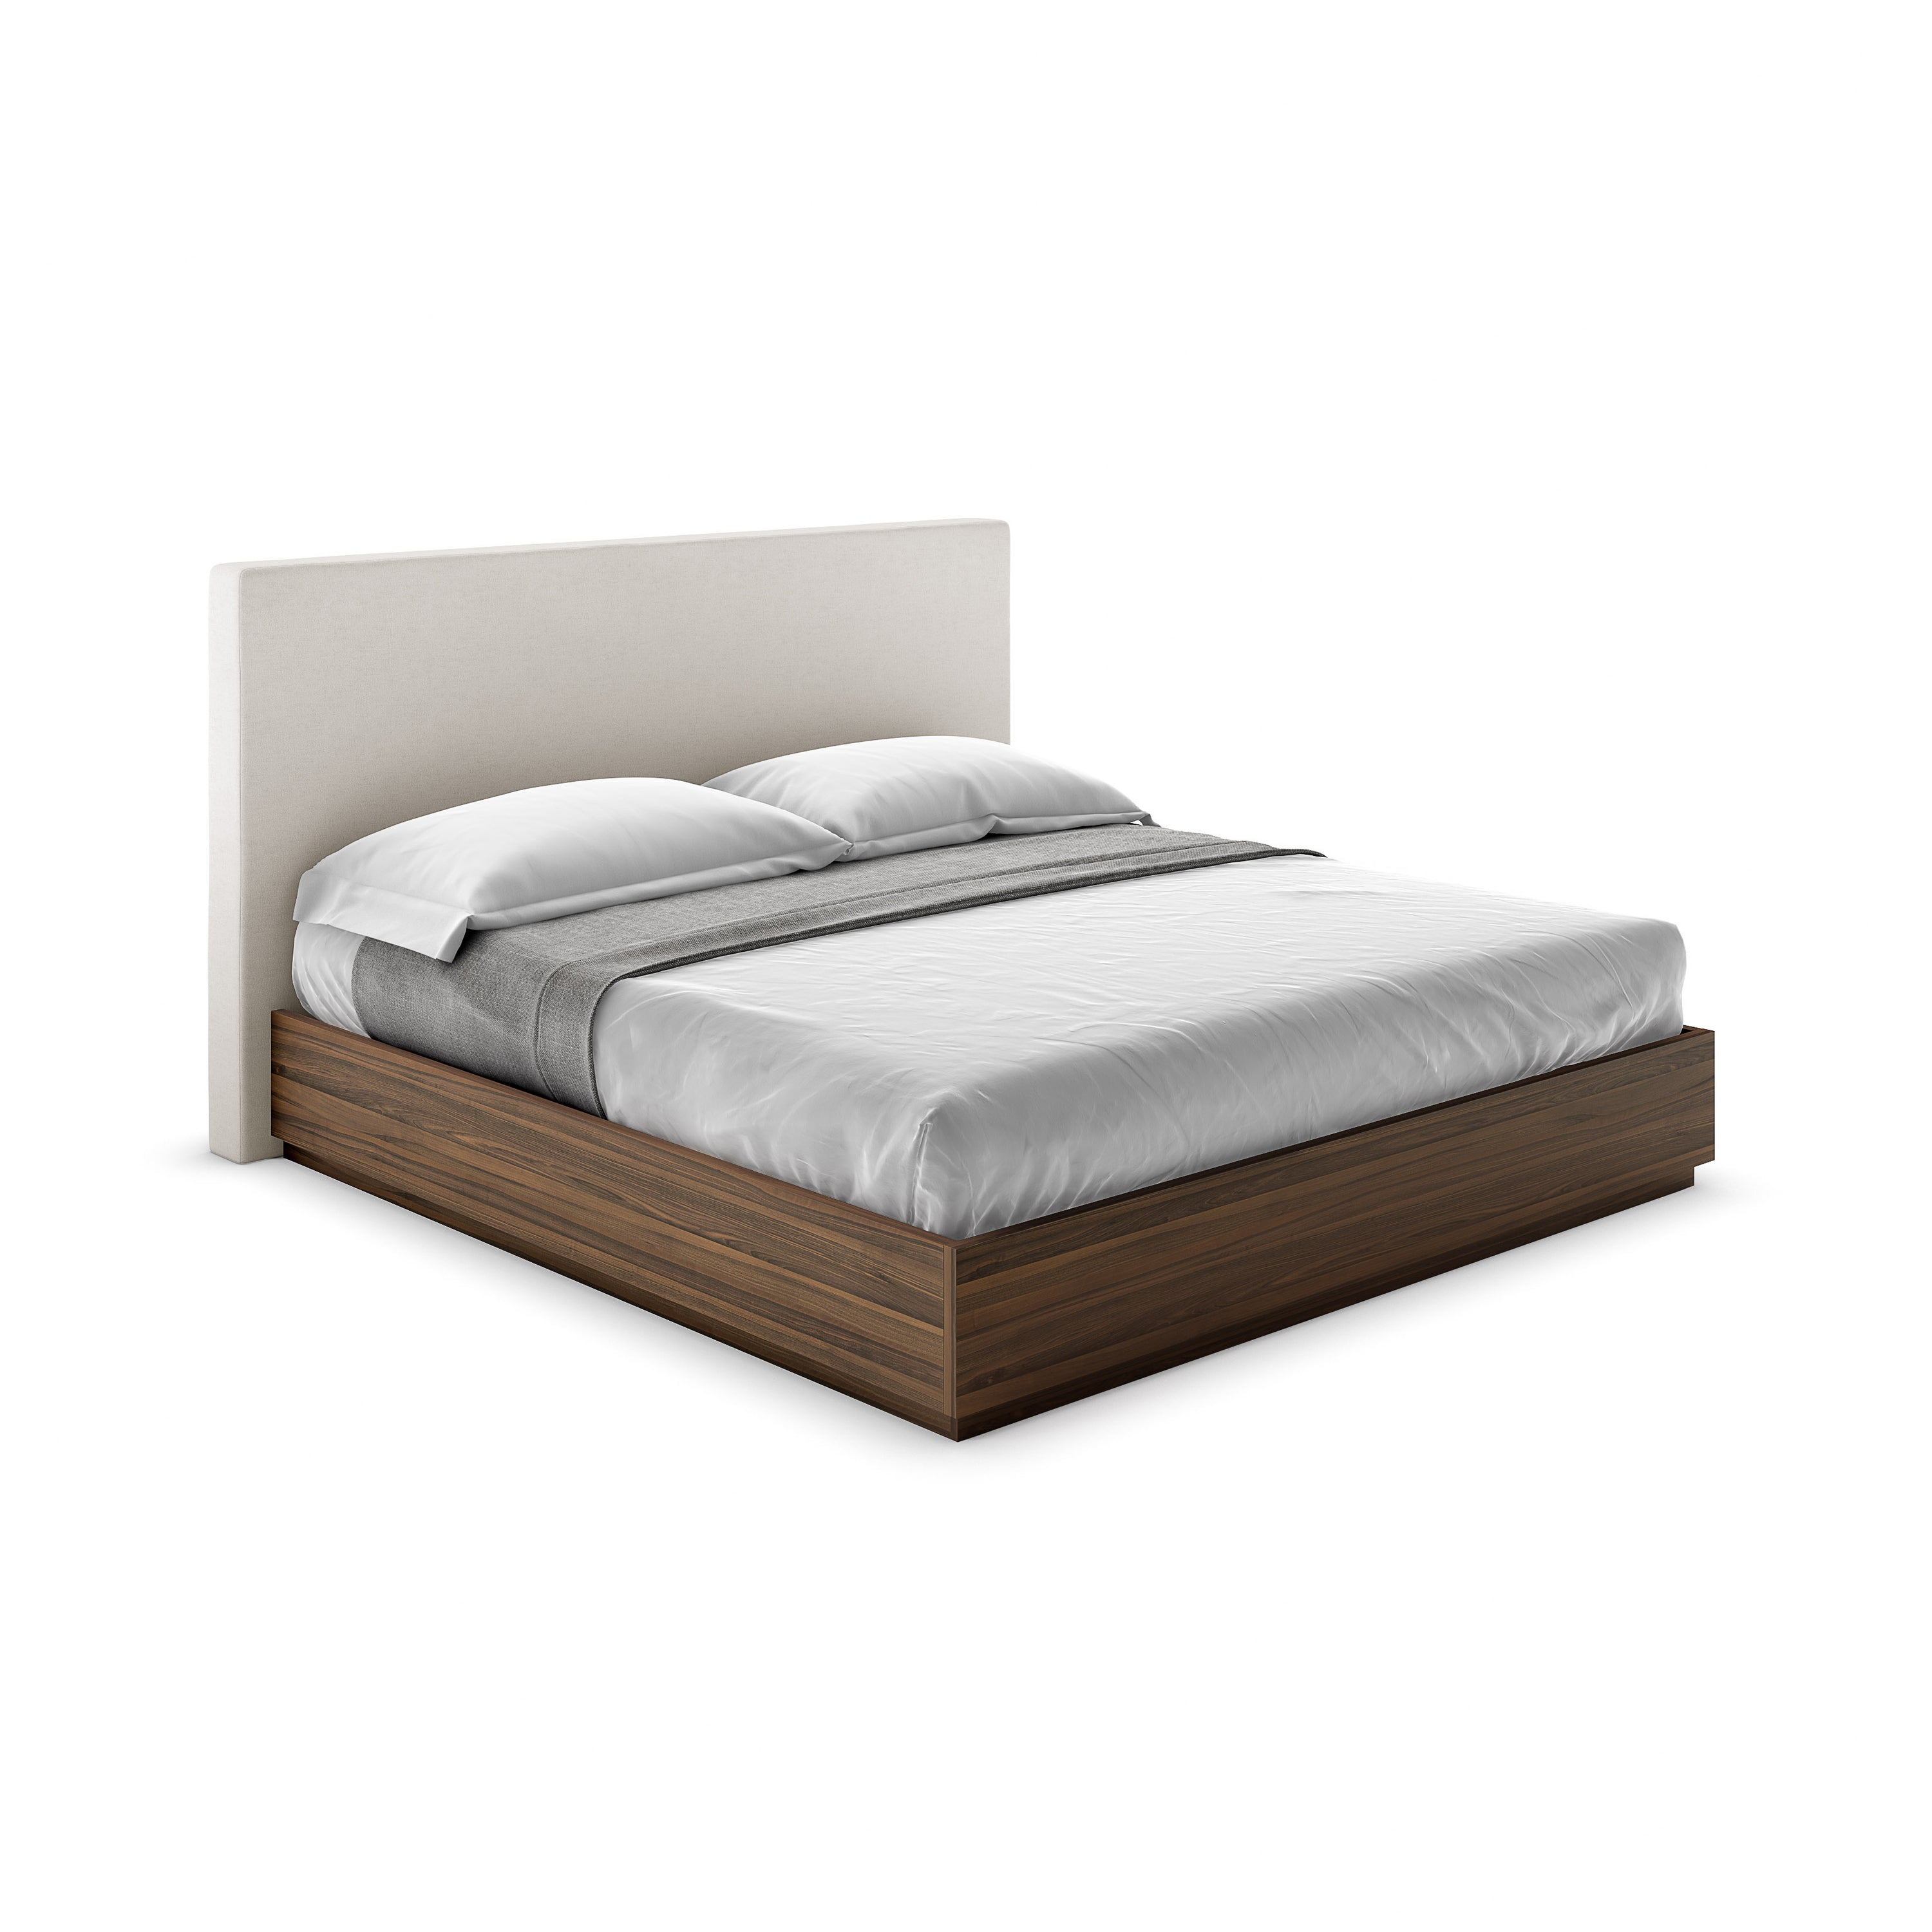 Maya Bed with Upholstered Headboard w/ Storage